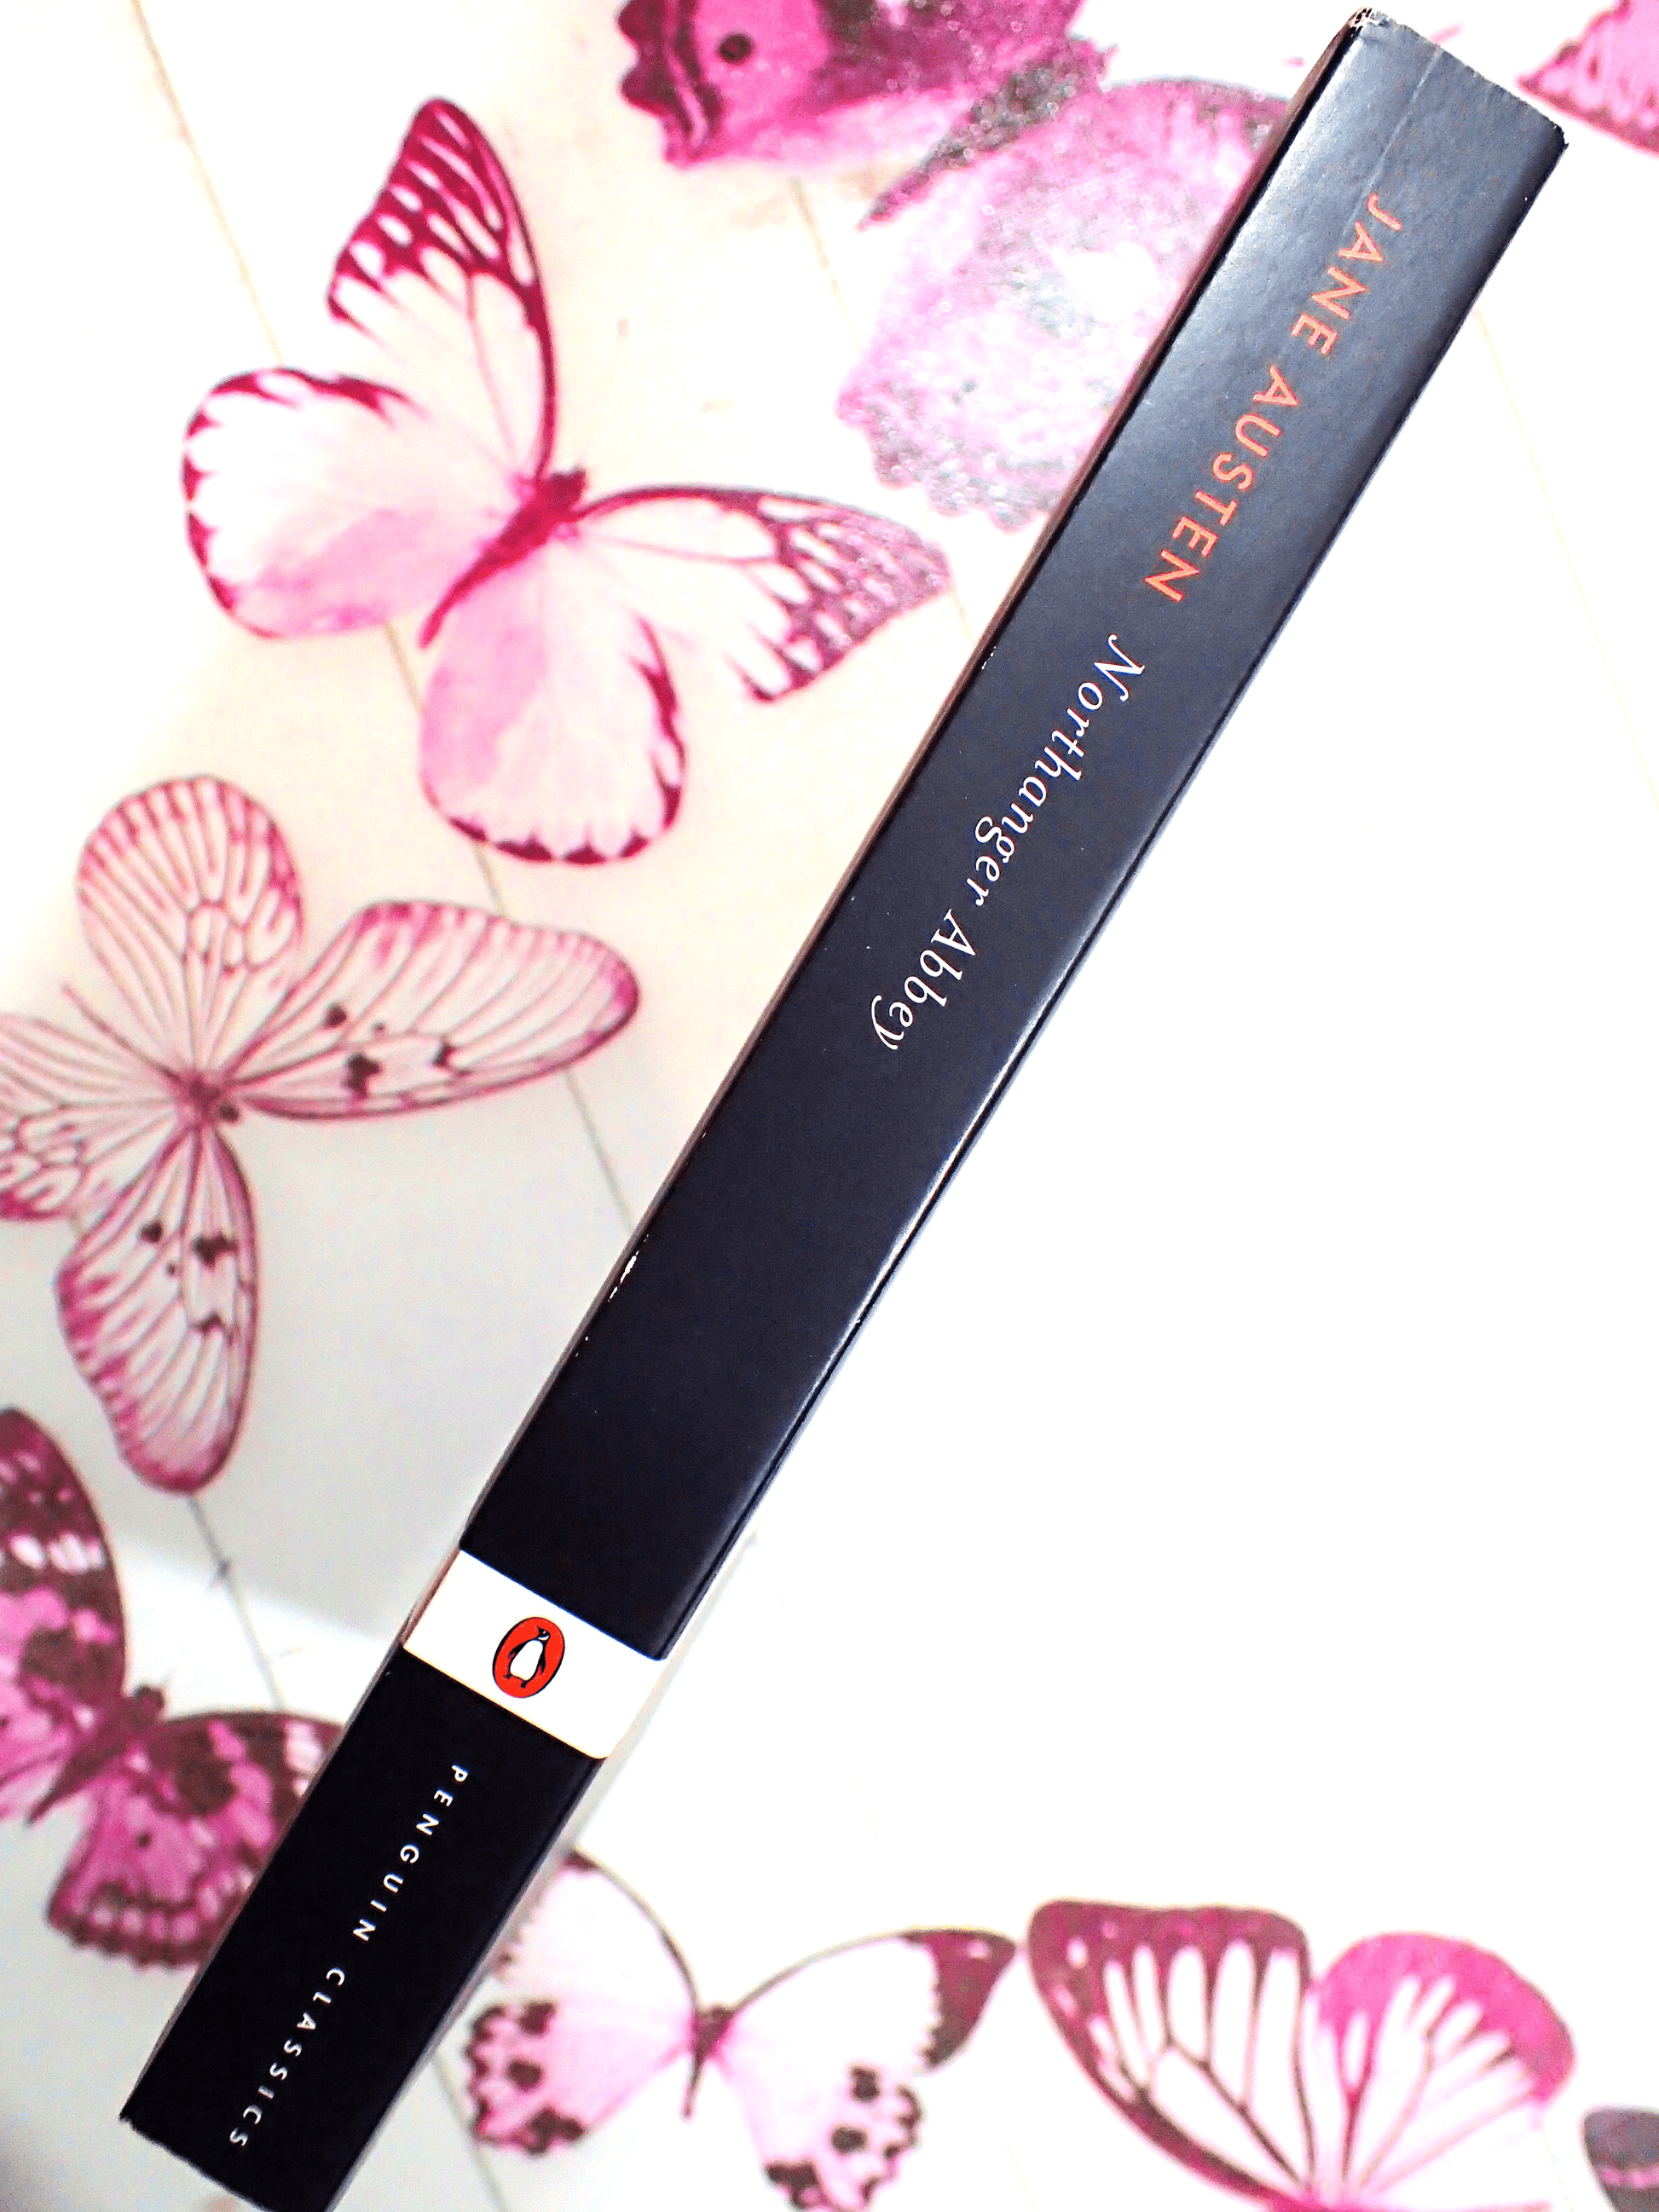 Spine of Northanger Abbey Jane Austen Puffin Paperback showing white and orange titles against a black ground on a butterfly background. 